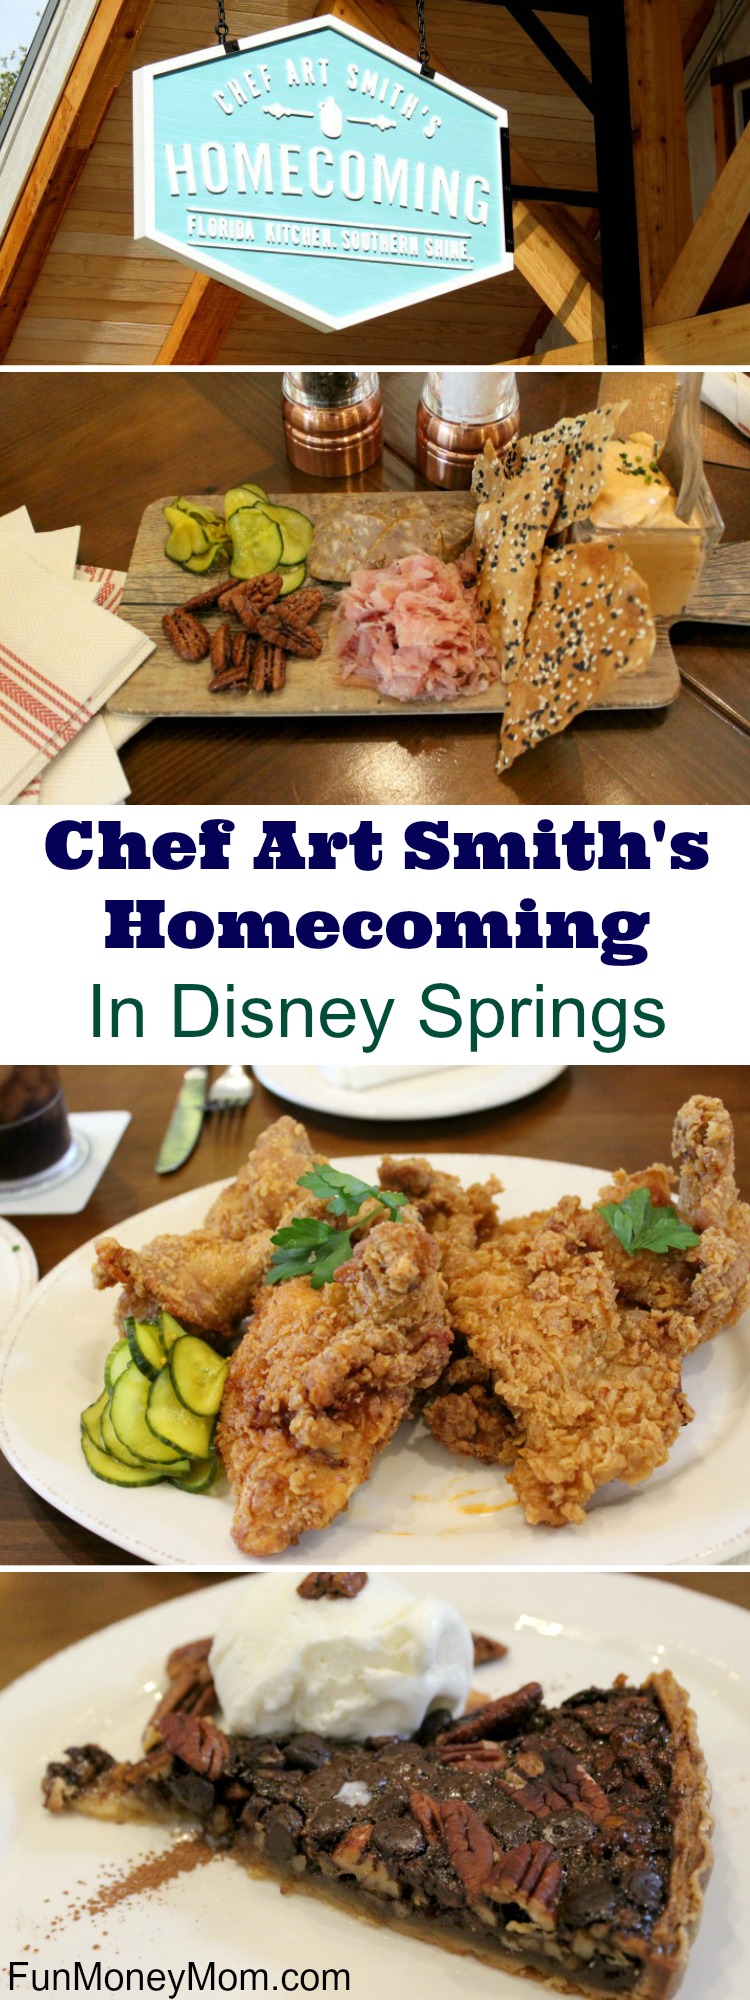 Heading to Disney Springs? If you like good ol' fashioned southern cooking, you're going to want to head straight to Chef Art Smith's Homecoming!